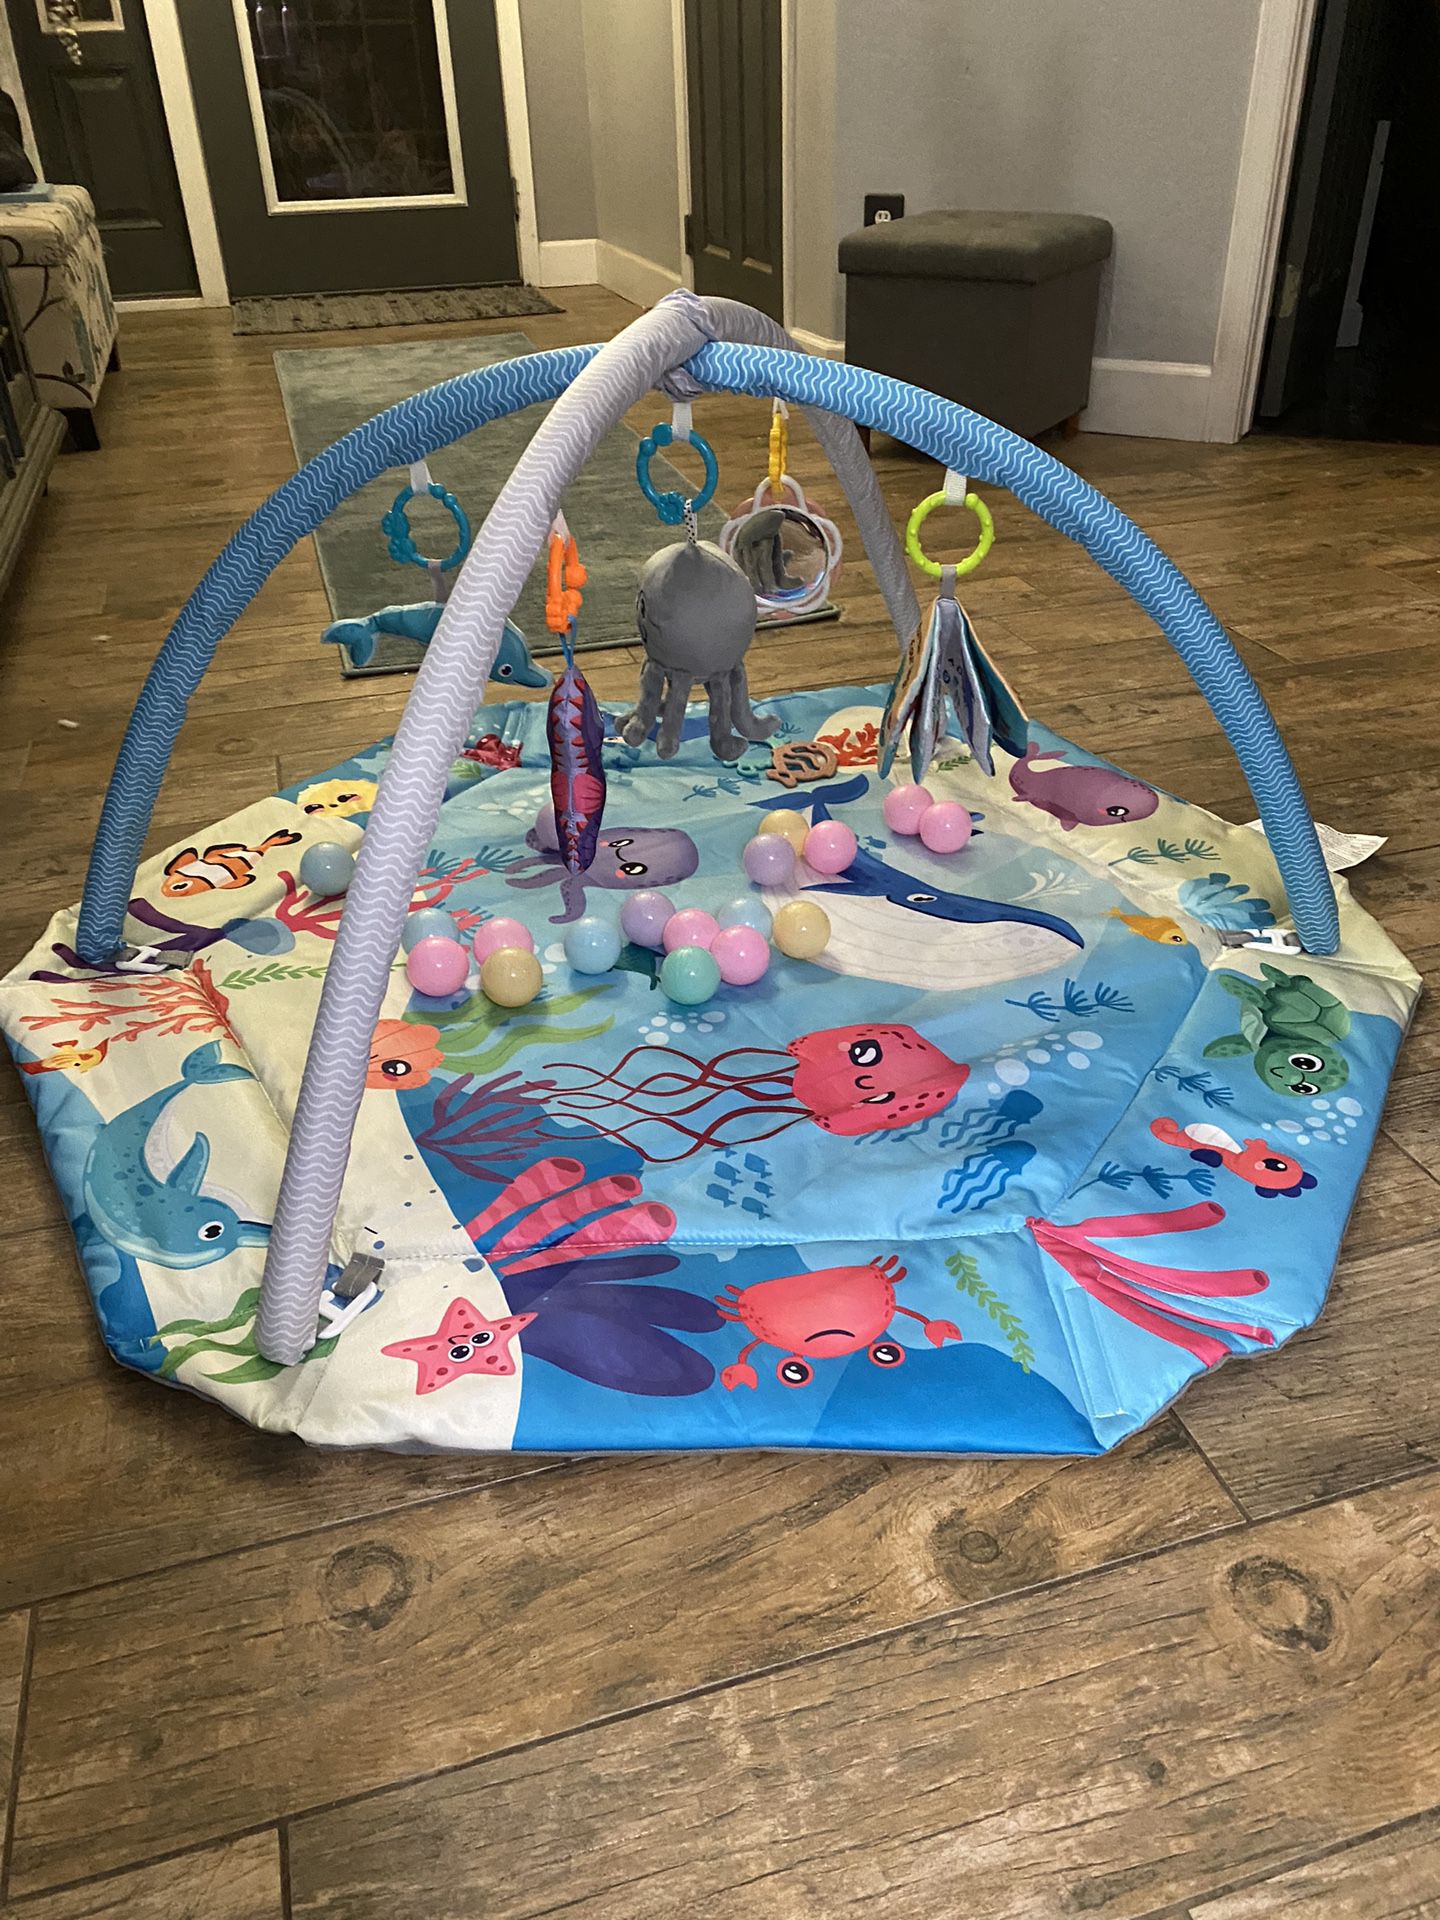 New- TFDER 8 In1 Tummy Time Mat And Activity Gym